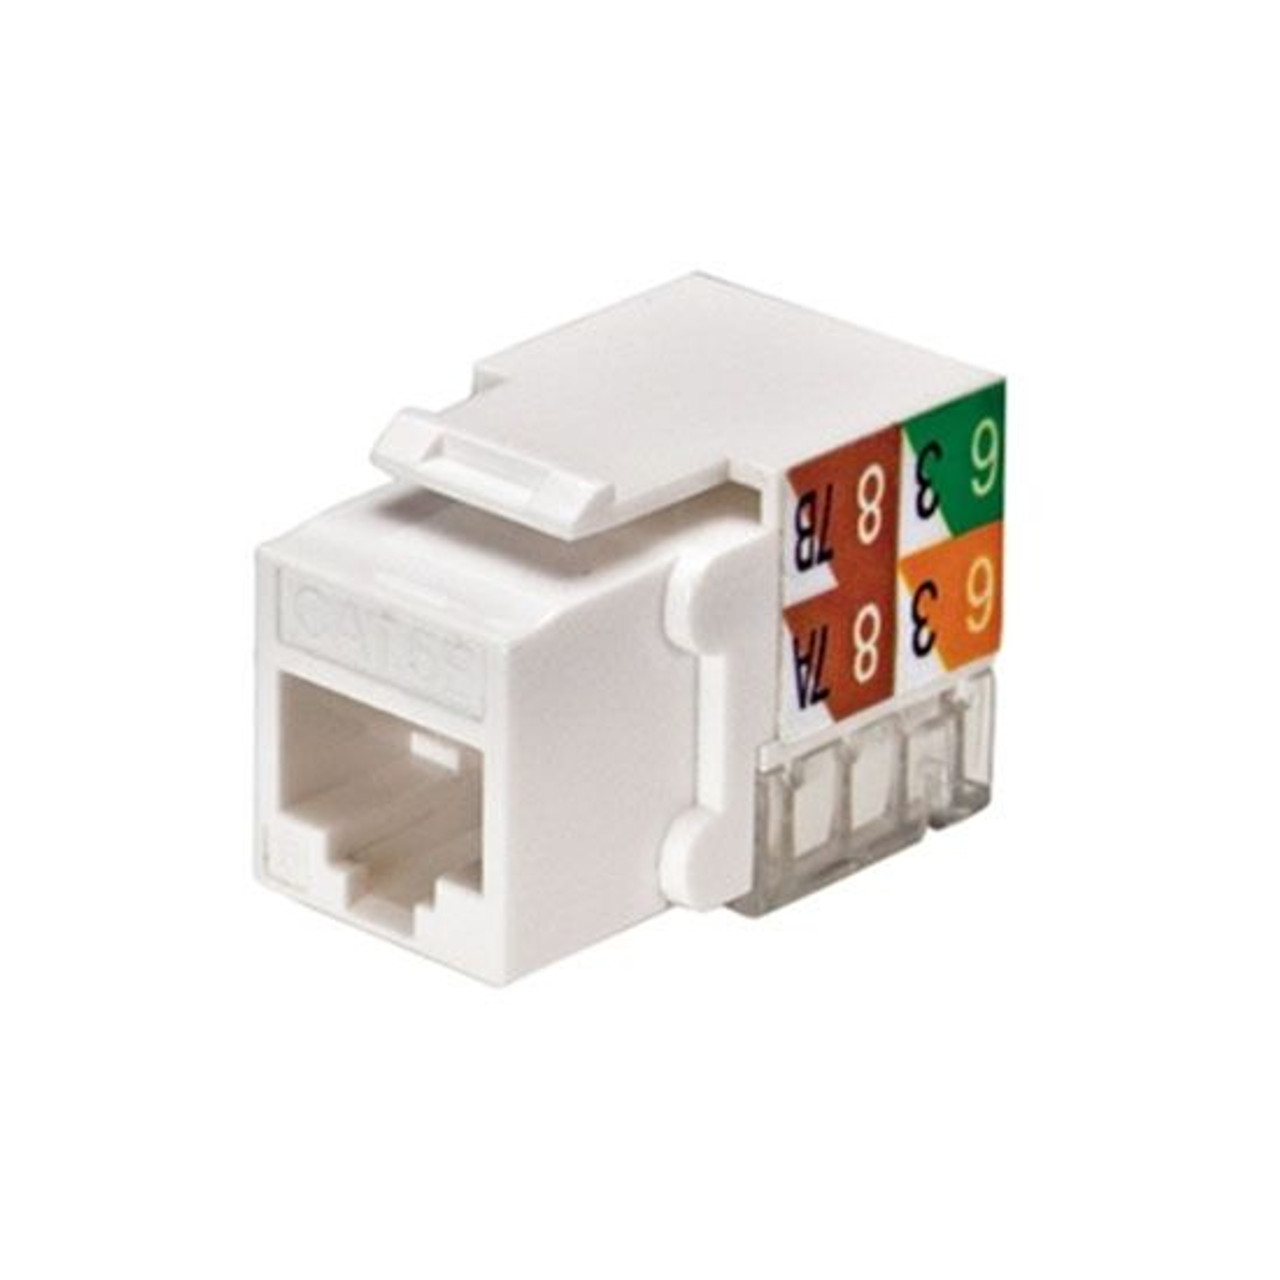 Eagle CAT5E Keystone Jack White RJ45 110 Punch Down Jack Connector Network 8P8C Cat-5e RJ-45 QuickPort 8 Wire Twisted Pair Modular Telephone Wall Plate Snap-In Insert Computer Data Network Telecom